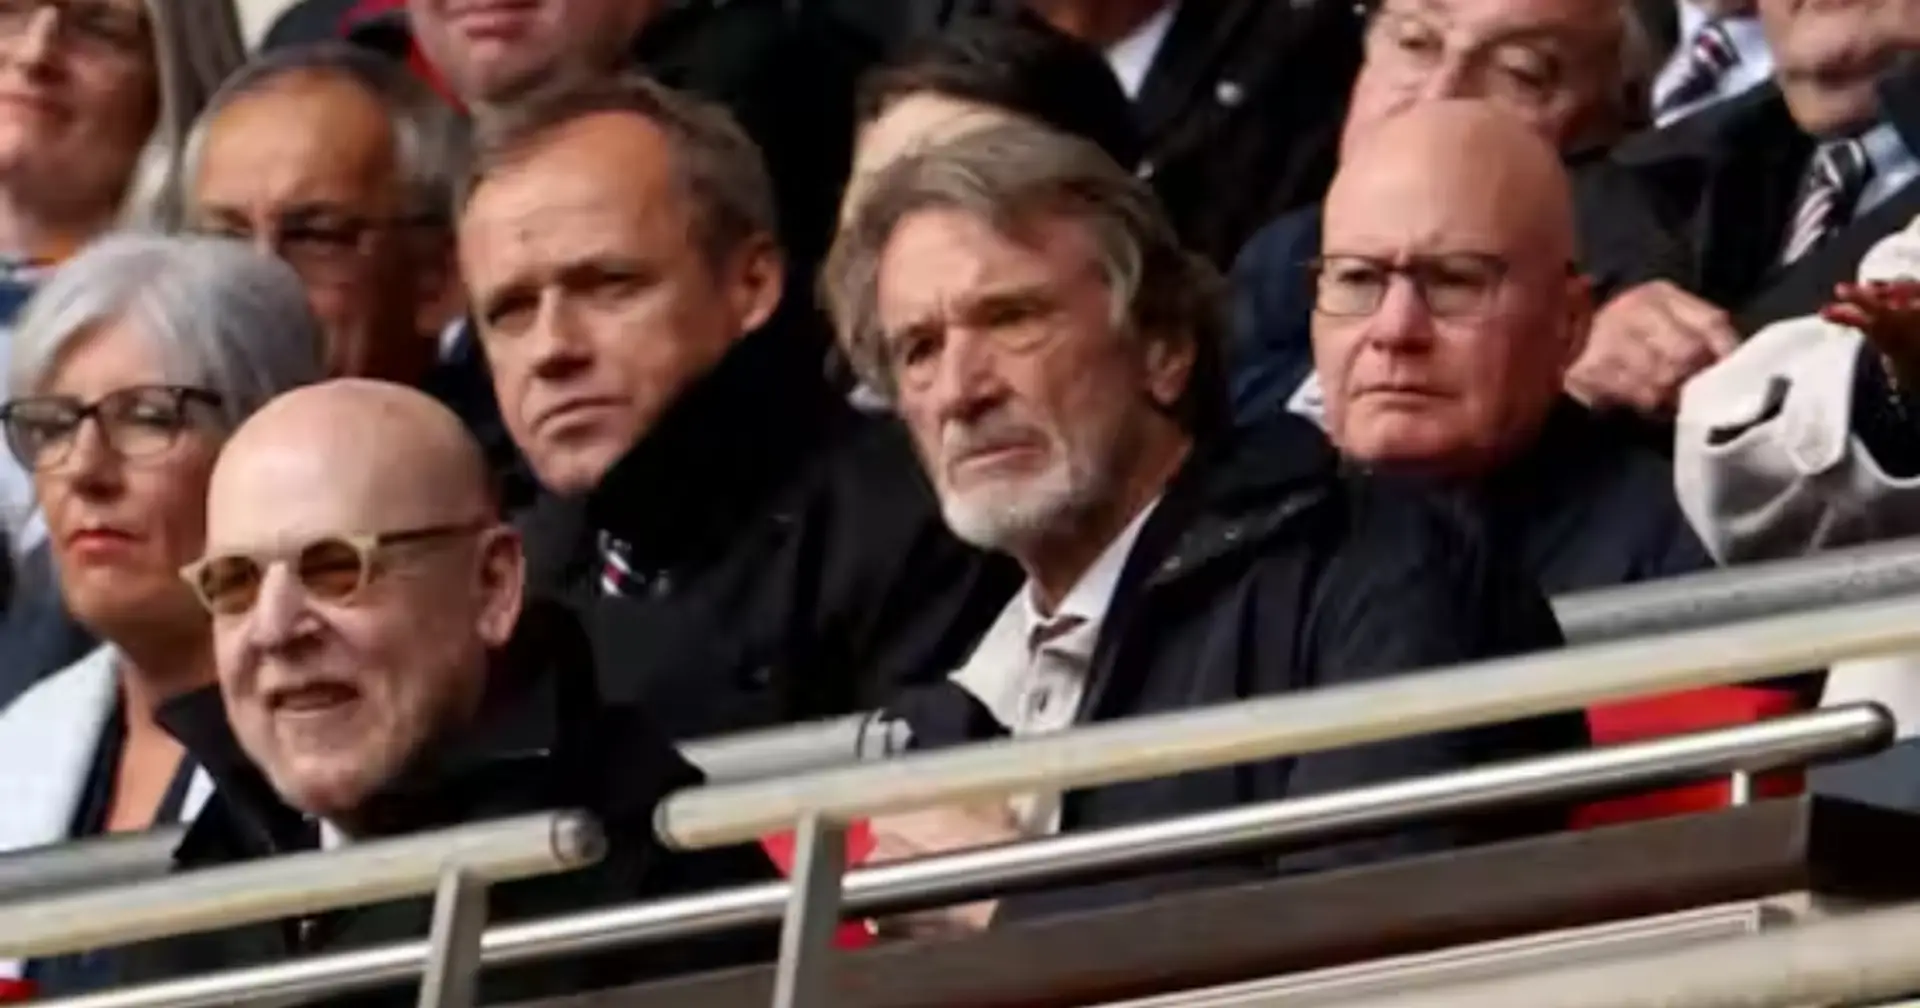 Caught on camera: Sir Jim Ratcliffe's reaction to Man United's collapse vs Coventry